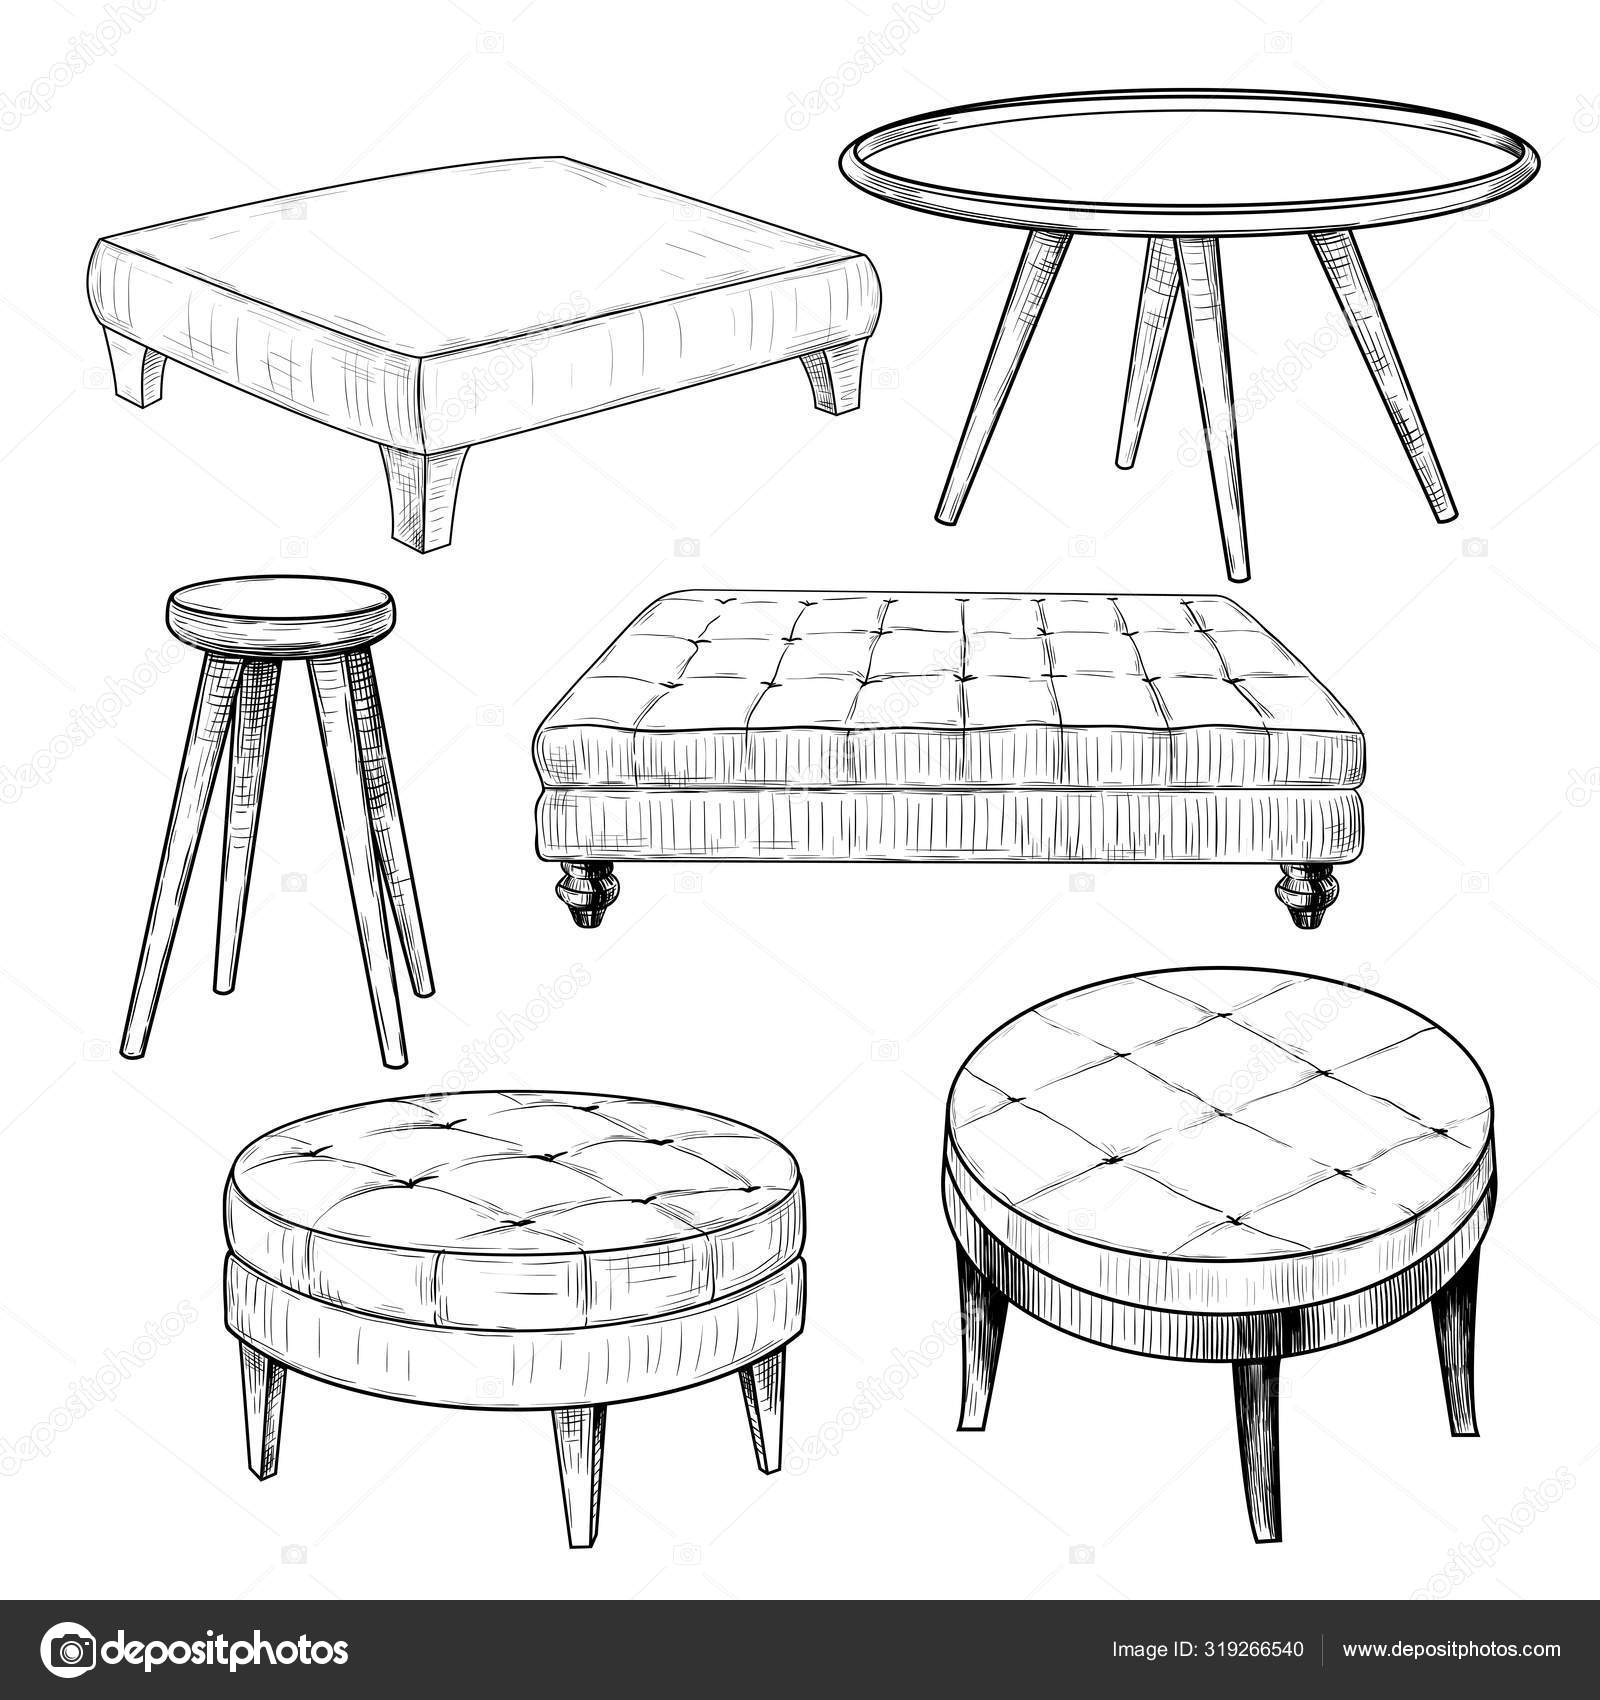 https://st3.depositphotos.com/29339756/31926/v/1600/depositphotos_319266540-stock-illustration-collection-sketches-various-coffee-tables.jpg